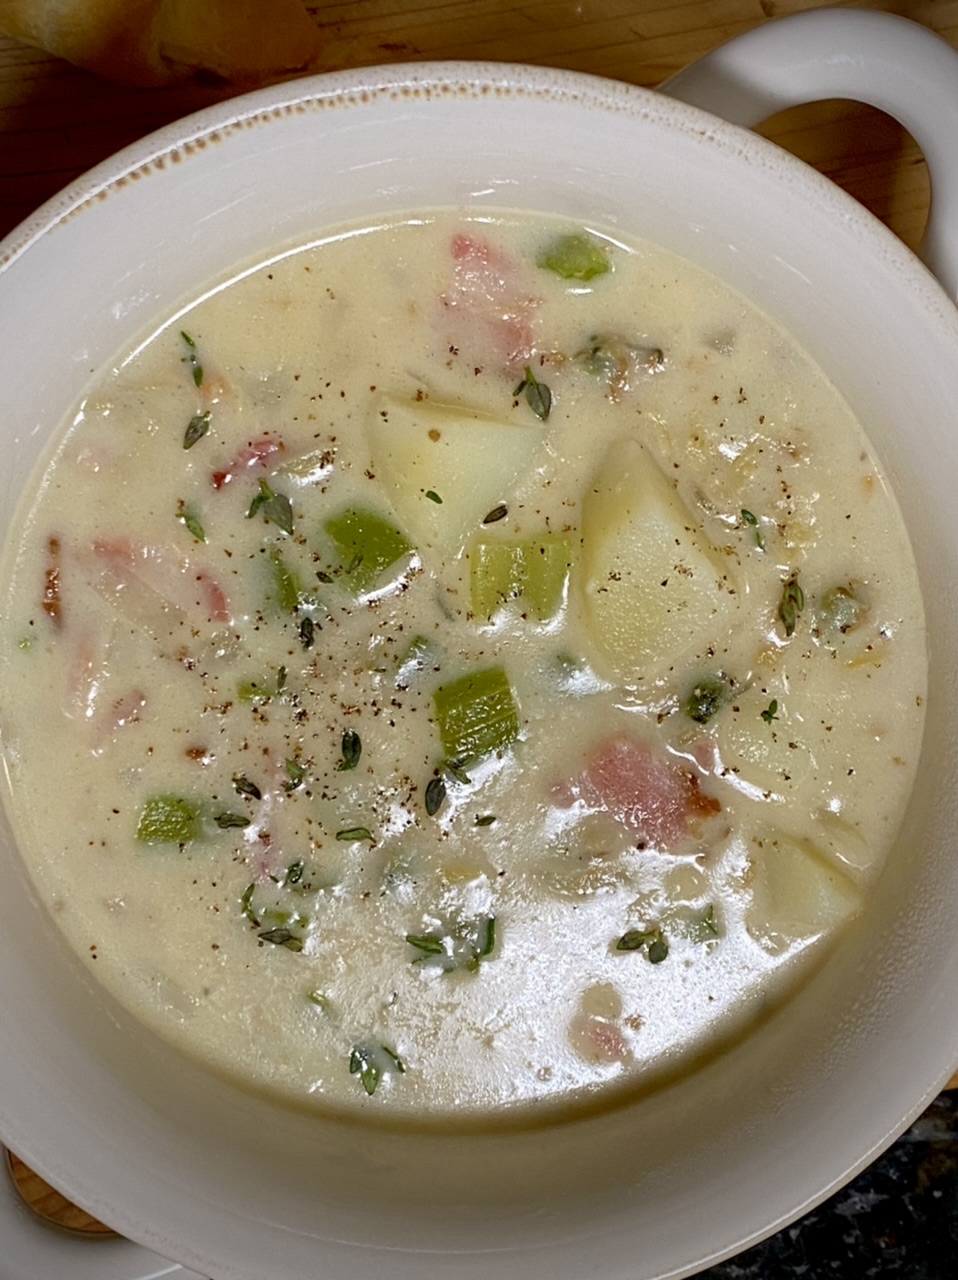 D2ED0FF0 FCFF 49B1 8CF7 F97689159243 - How to Make New England Clam Chowder from Scratch